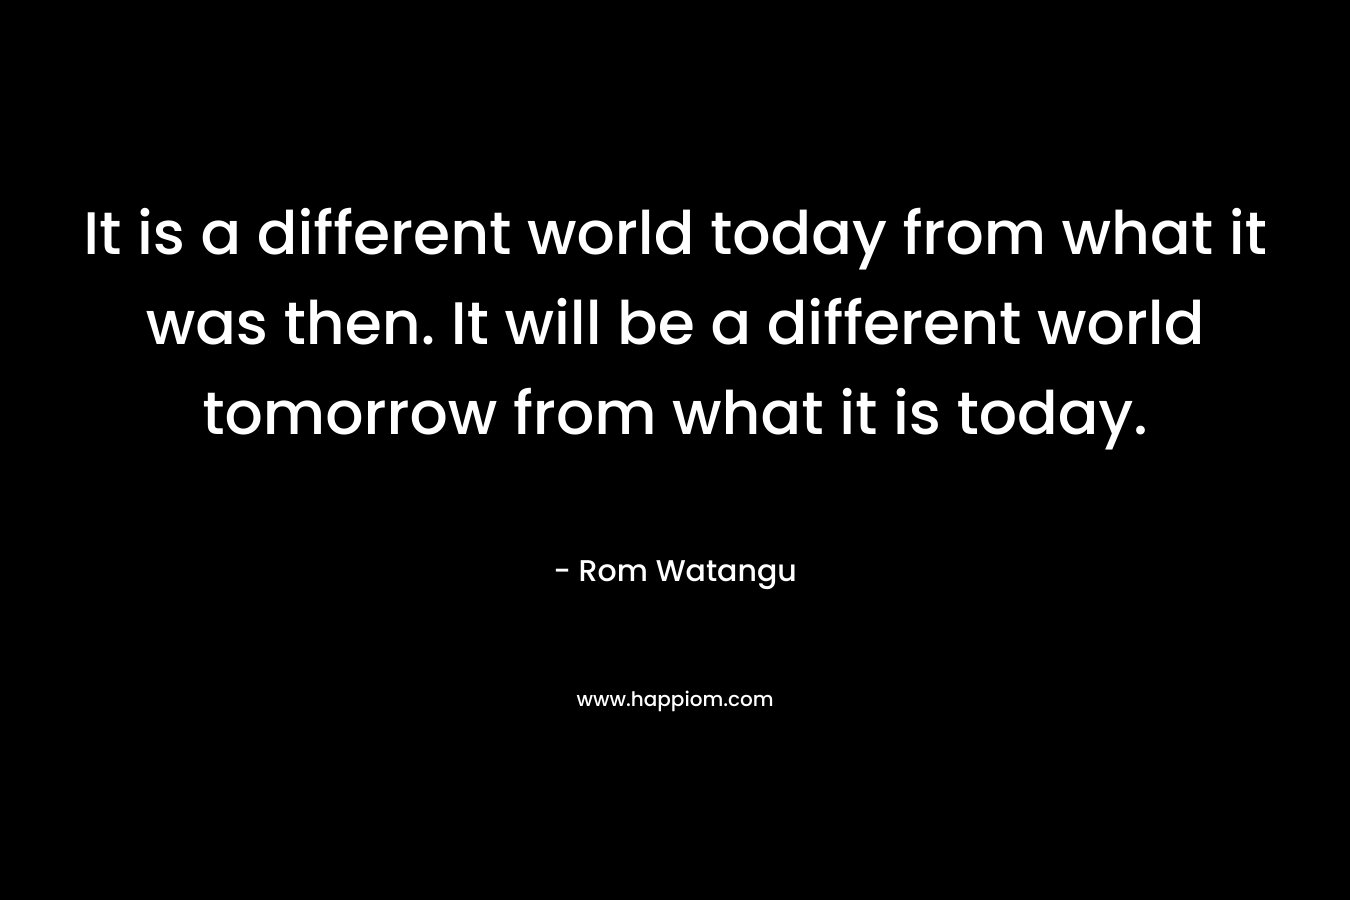 It is a different world today from what it was then. It will be a different world tomorrow from what it is today.